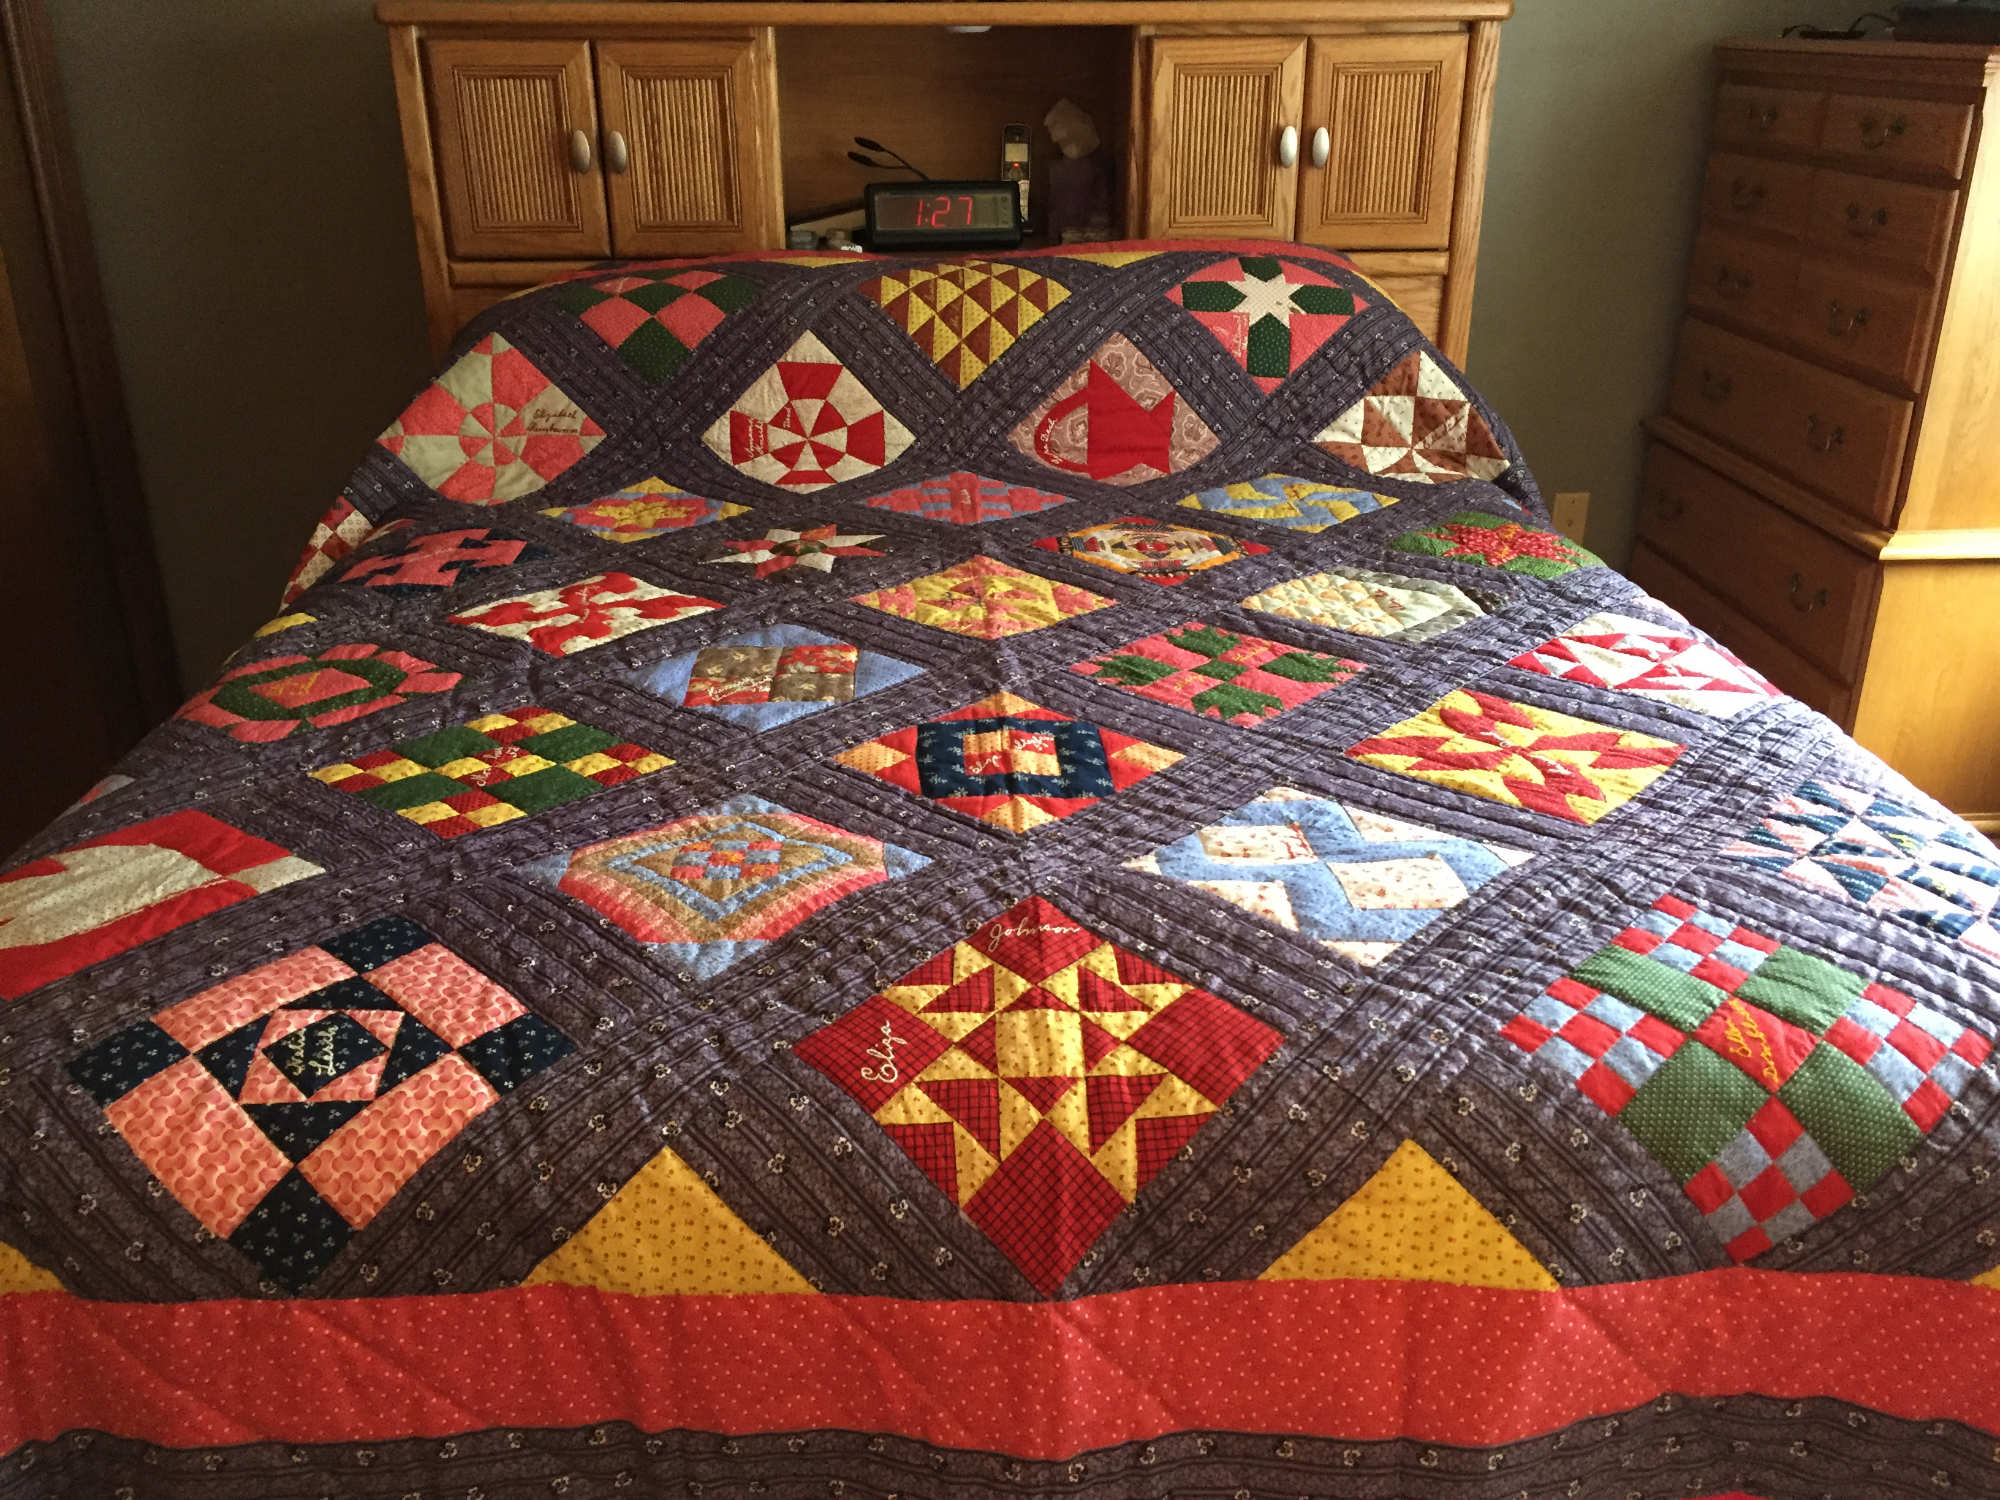 Friendships in Fabric: The Story of a Family Quilt - Hagenbuch Family